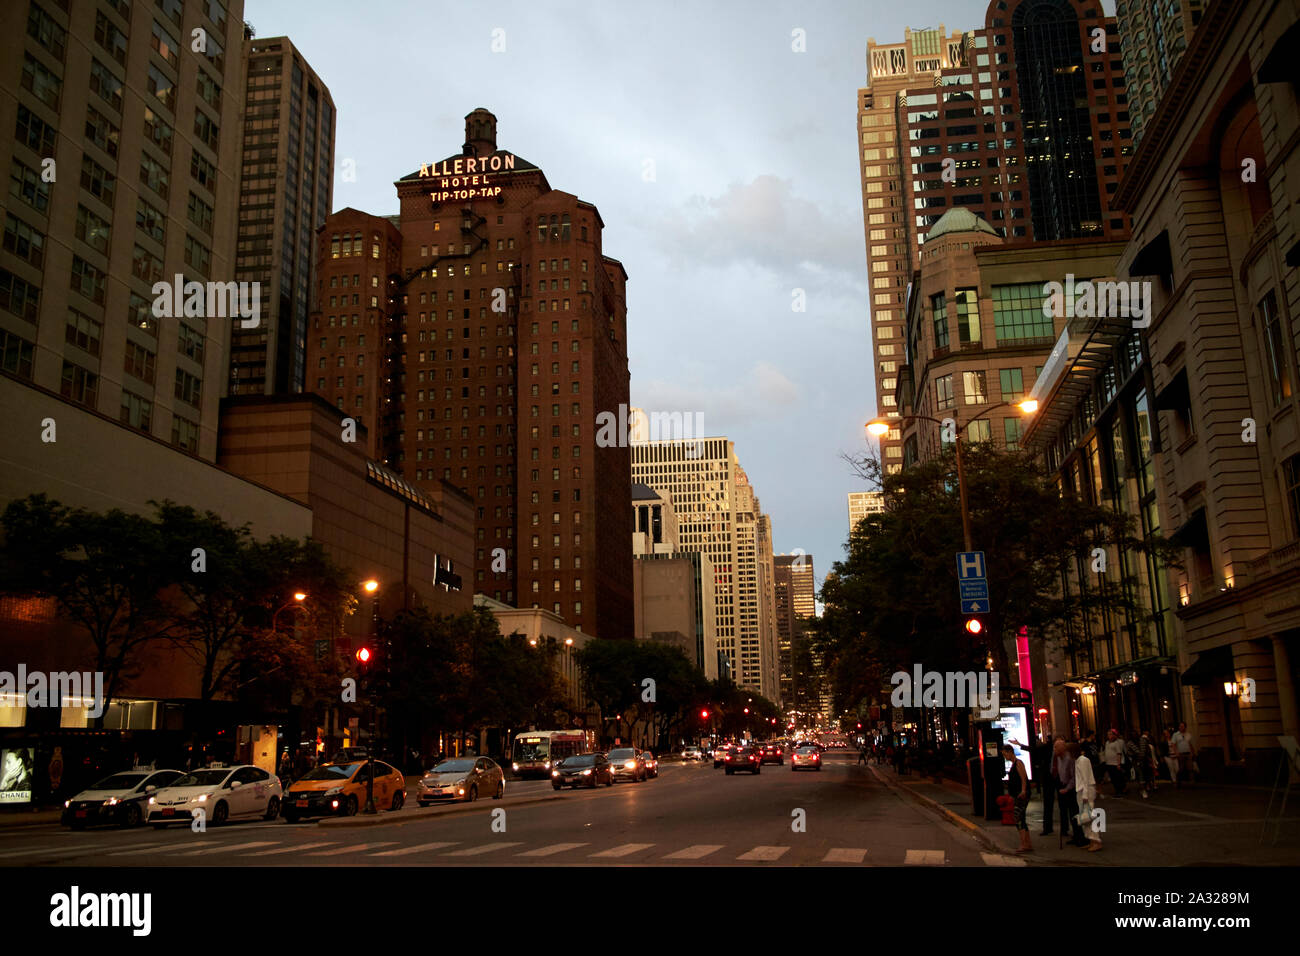 looking along magnificent mile near the allerton hotel at dusk in  chicago illinois united states of america Stock Photo